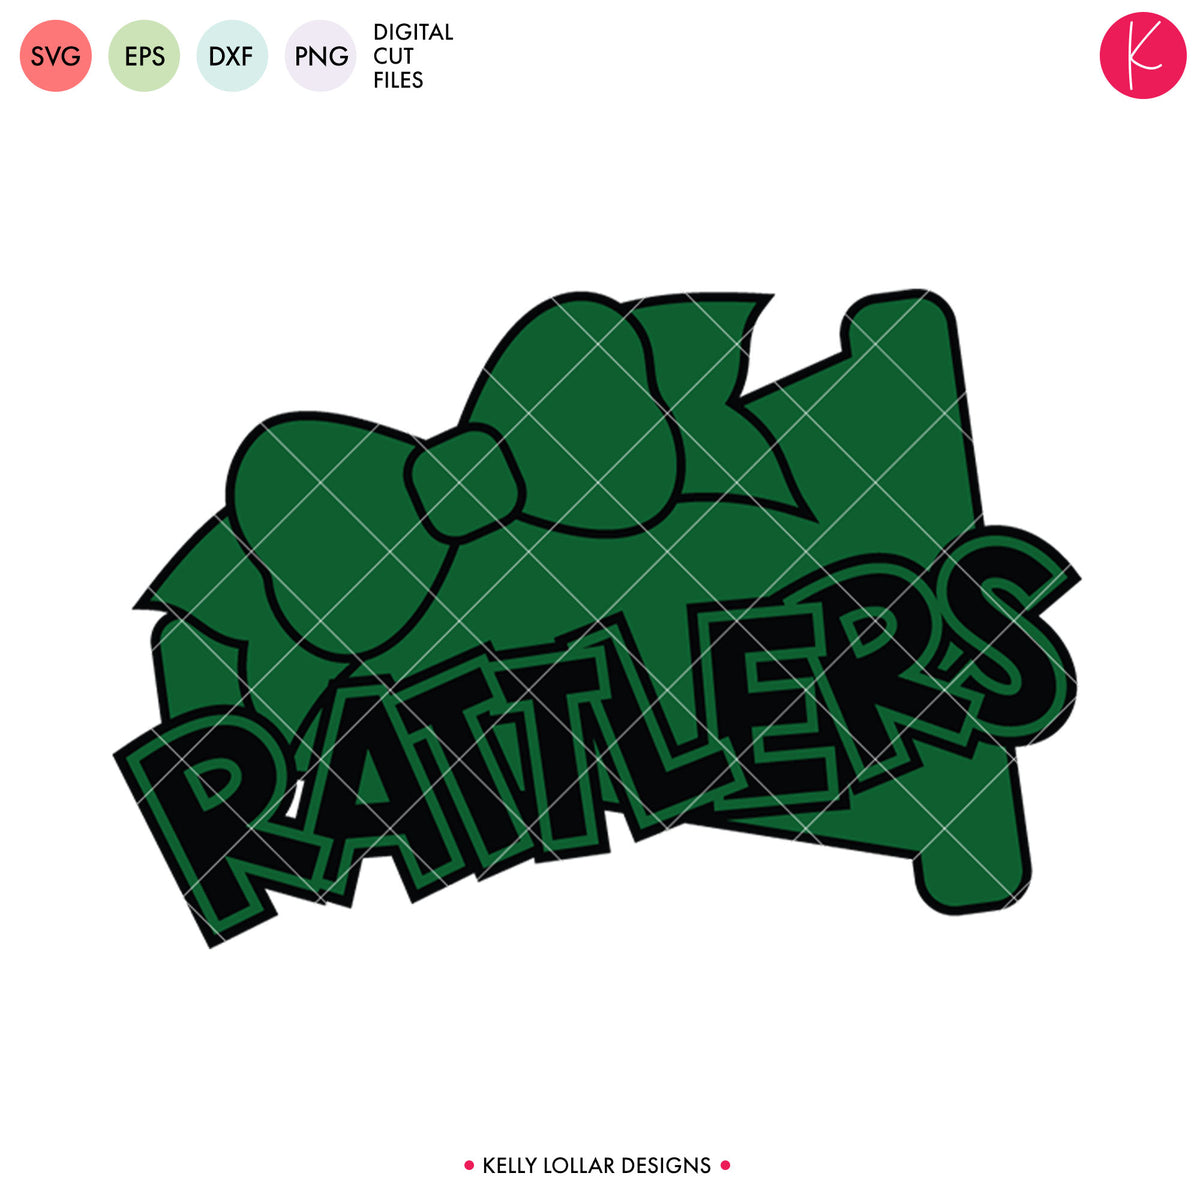 Rattlers Cheer Bundle | SVG DXF EPS PNG Cut Files